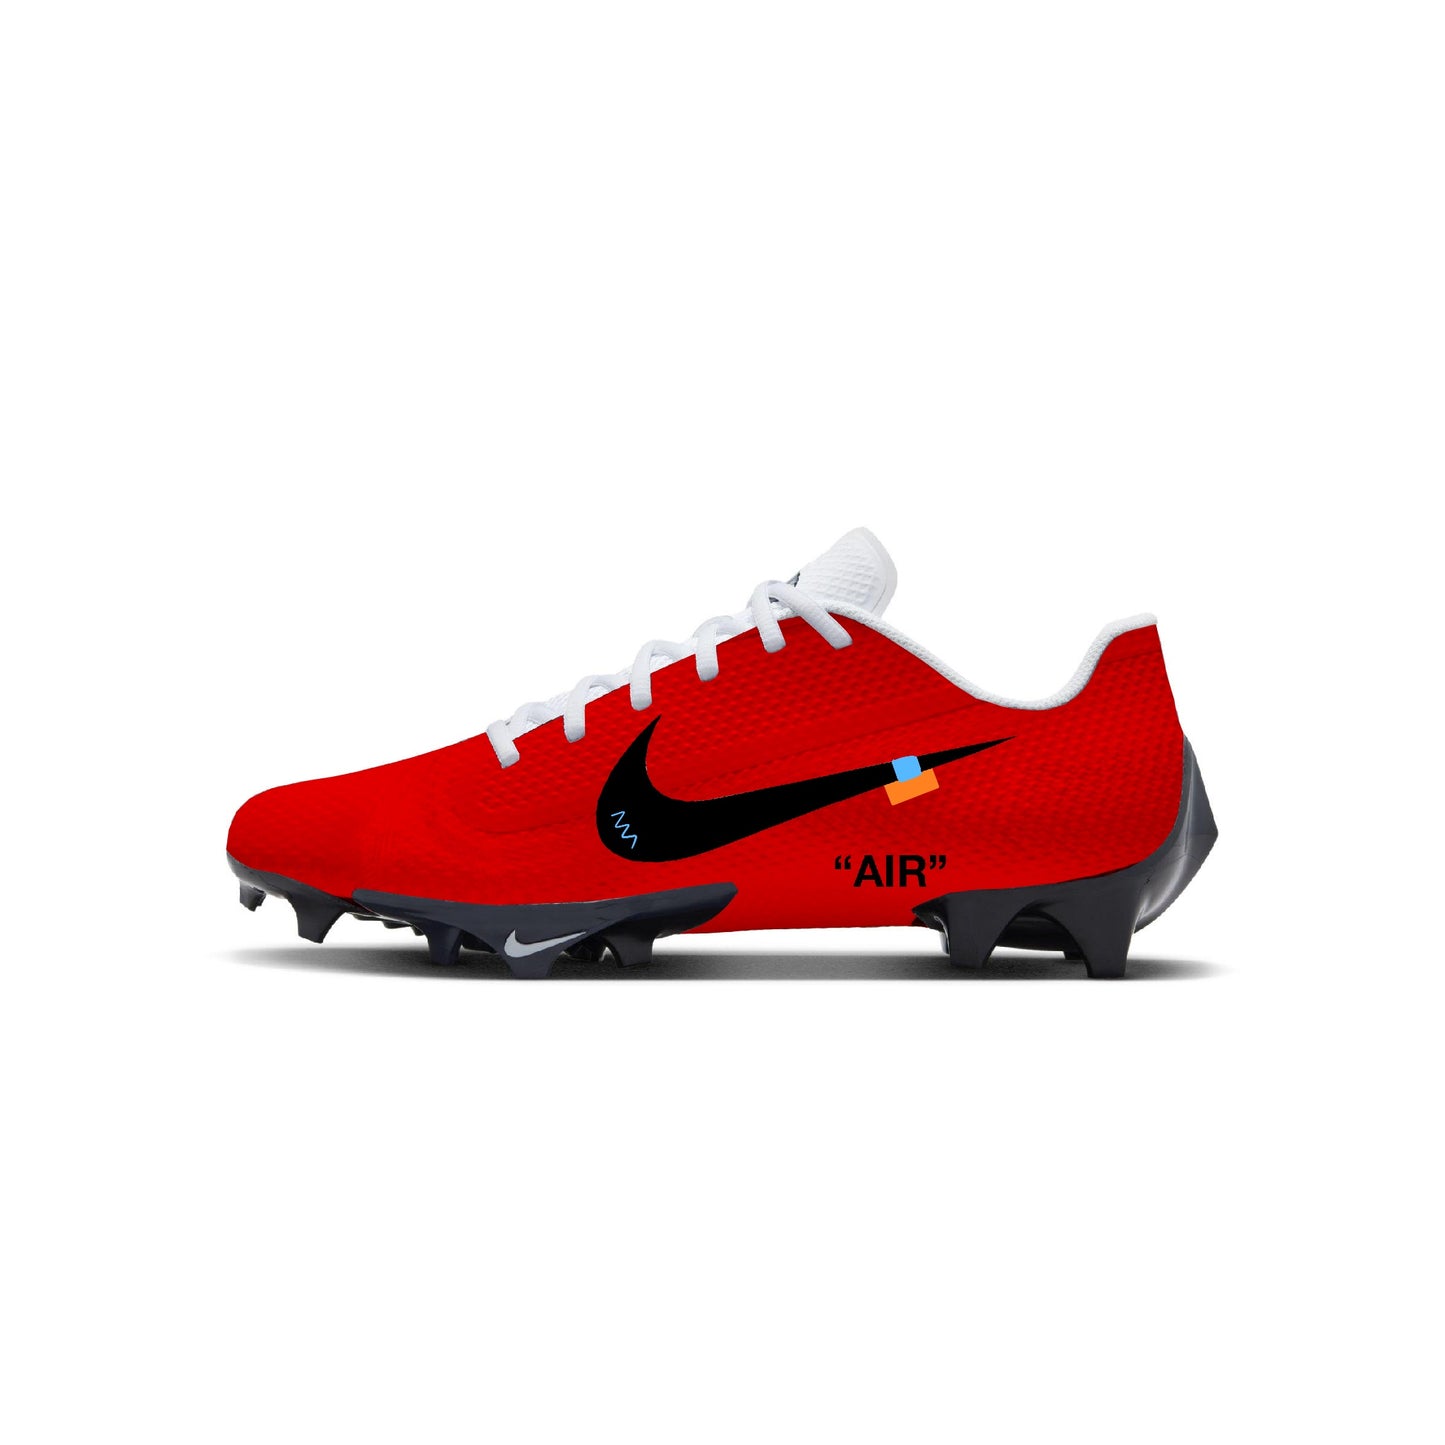 Off-White Color Rush Low Football Cleats 7 M / Red